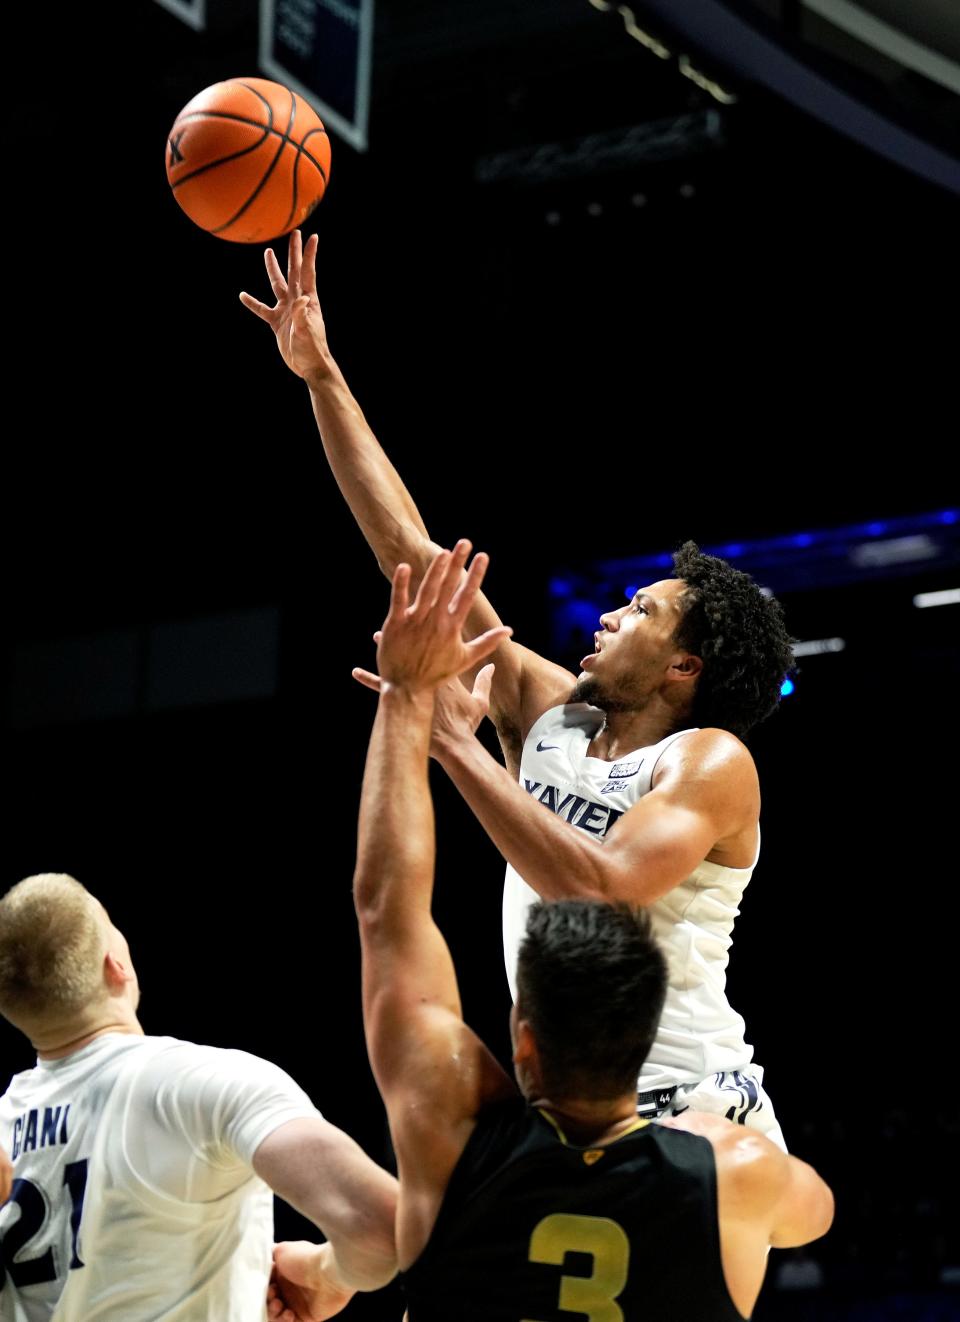 Xavier guard Desmond Claude (1) scored 24 points as the Musketeers faced Oakland Golden Grizzlies Monday, November 27, 2023 at the Cintas Center. Xavier lost 78-76.